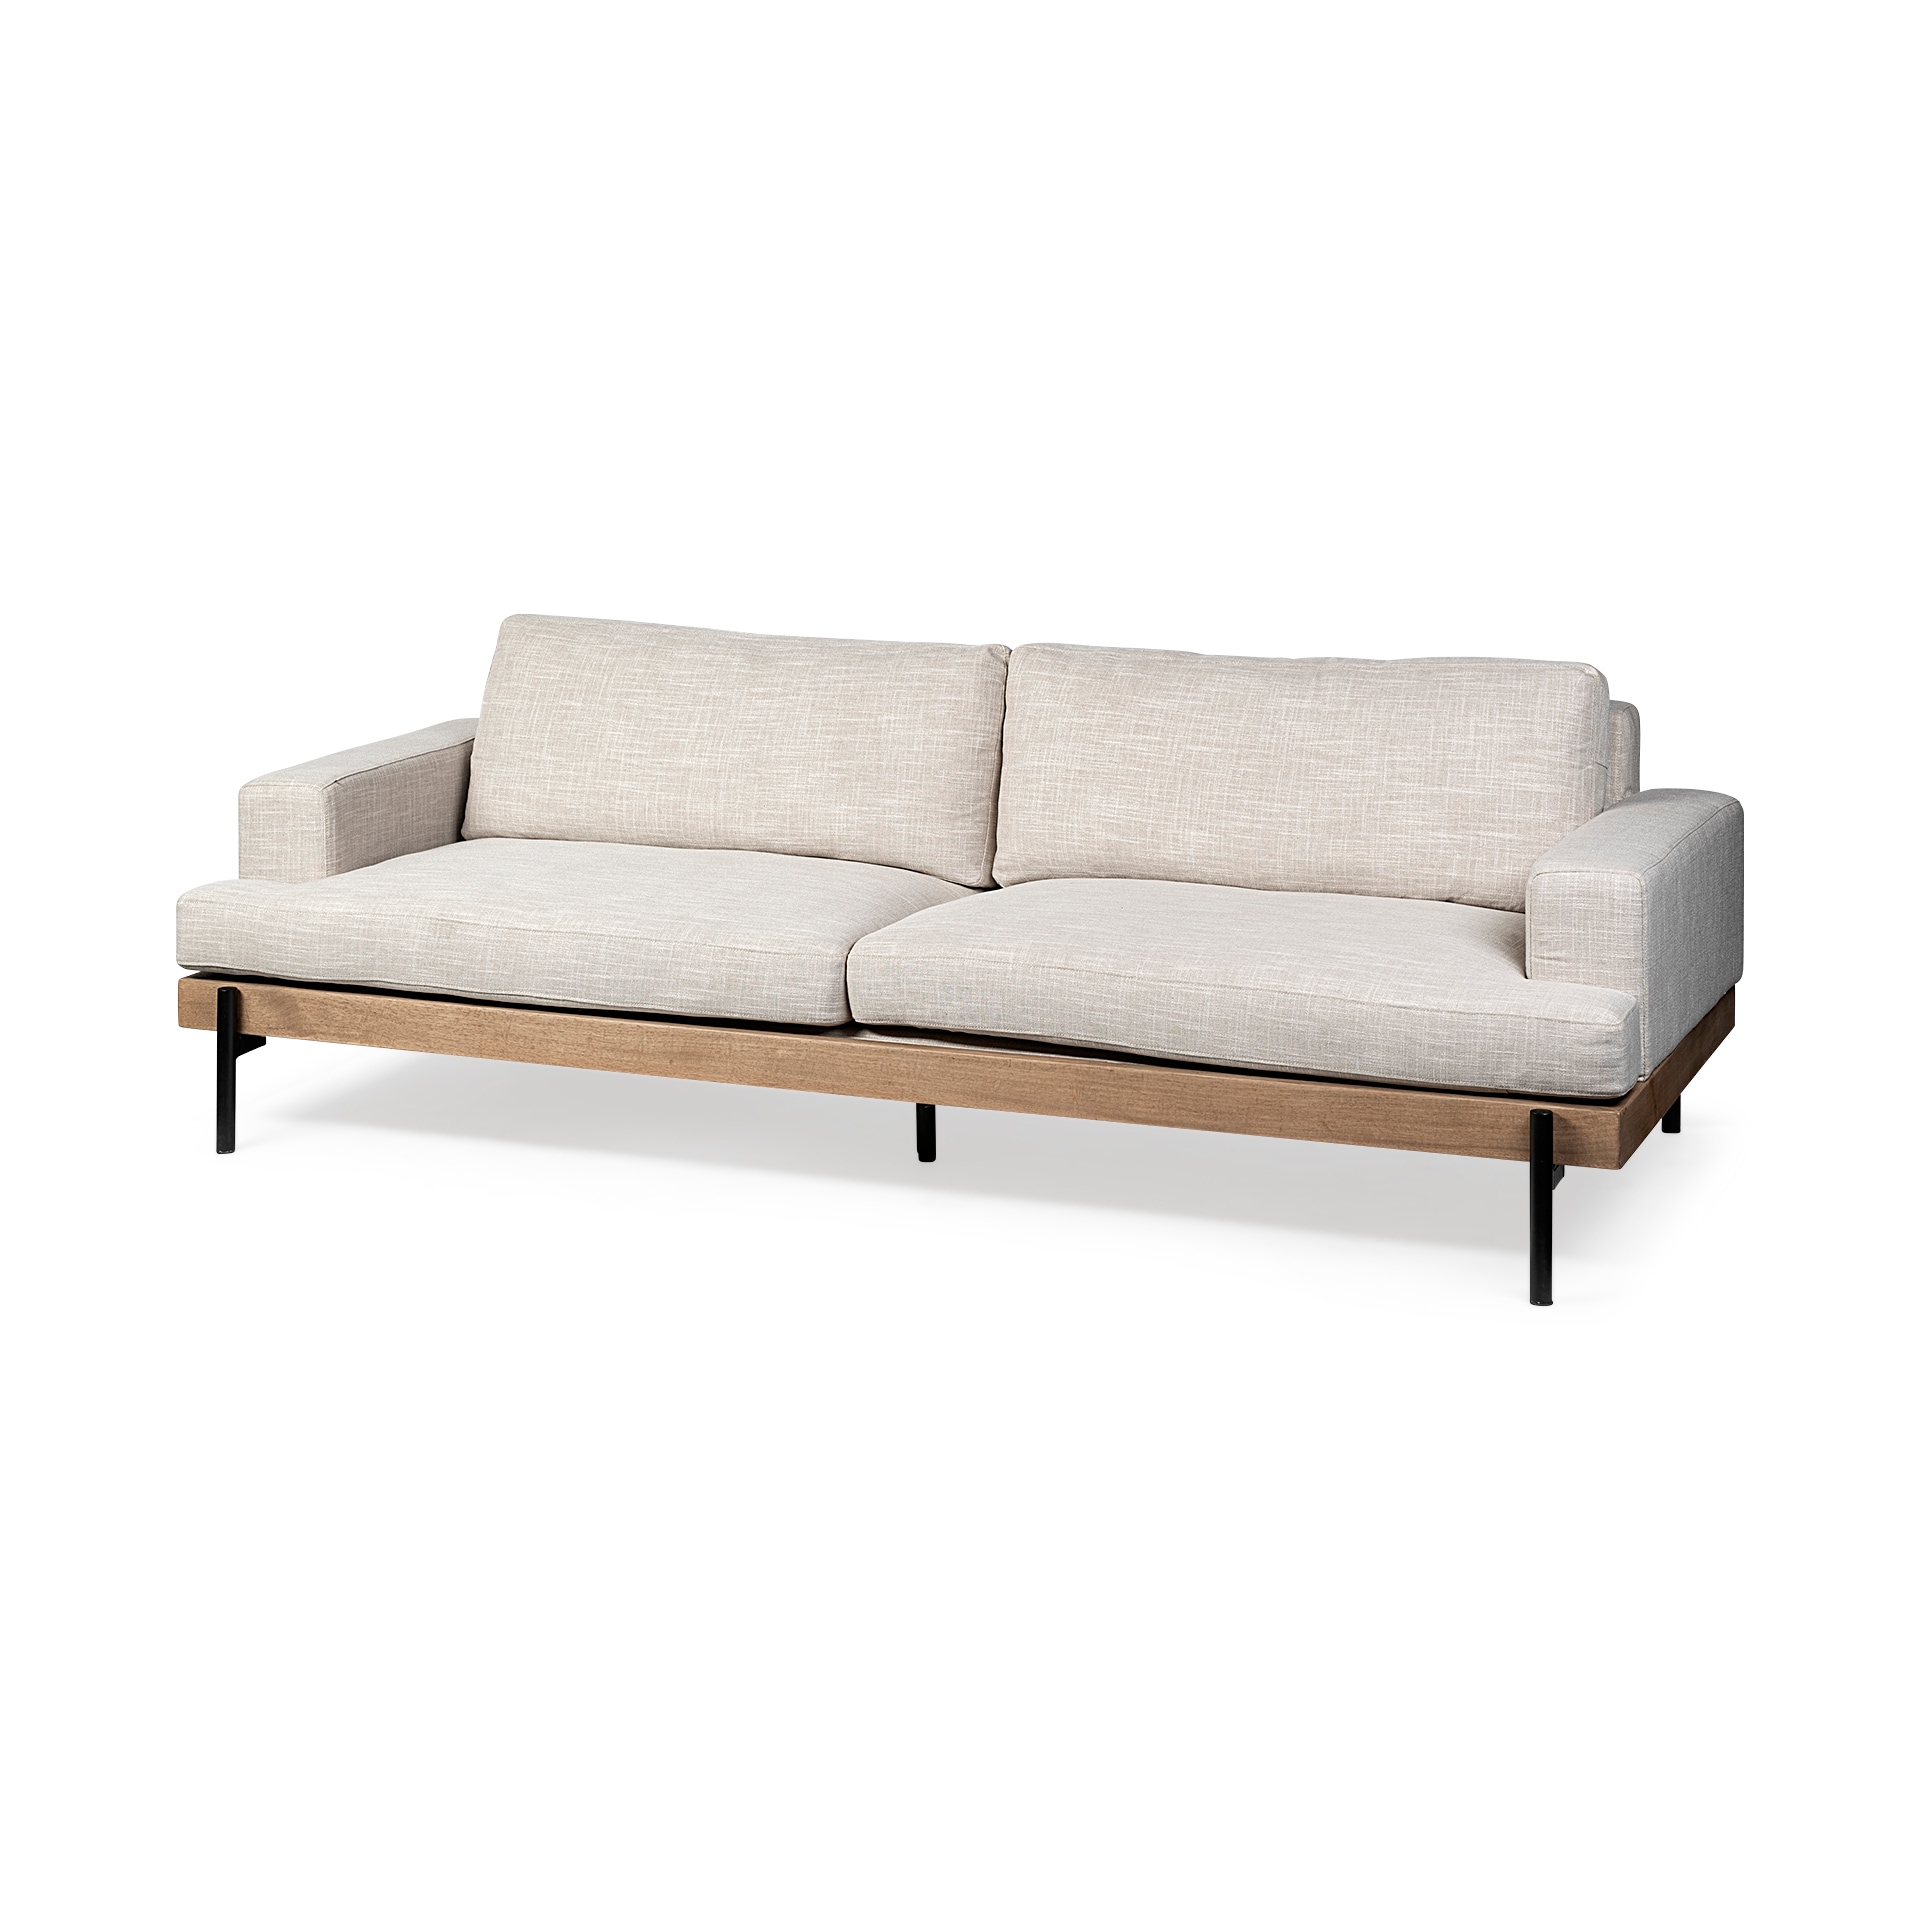 Mercana Colburne Industrial Beige Polyester/Blend Sofa in the Couches,  Sofas & Loveseats department at Lowes.com